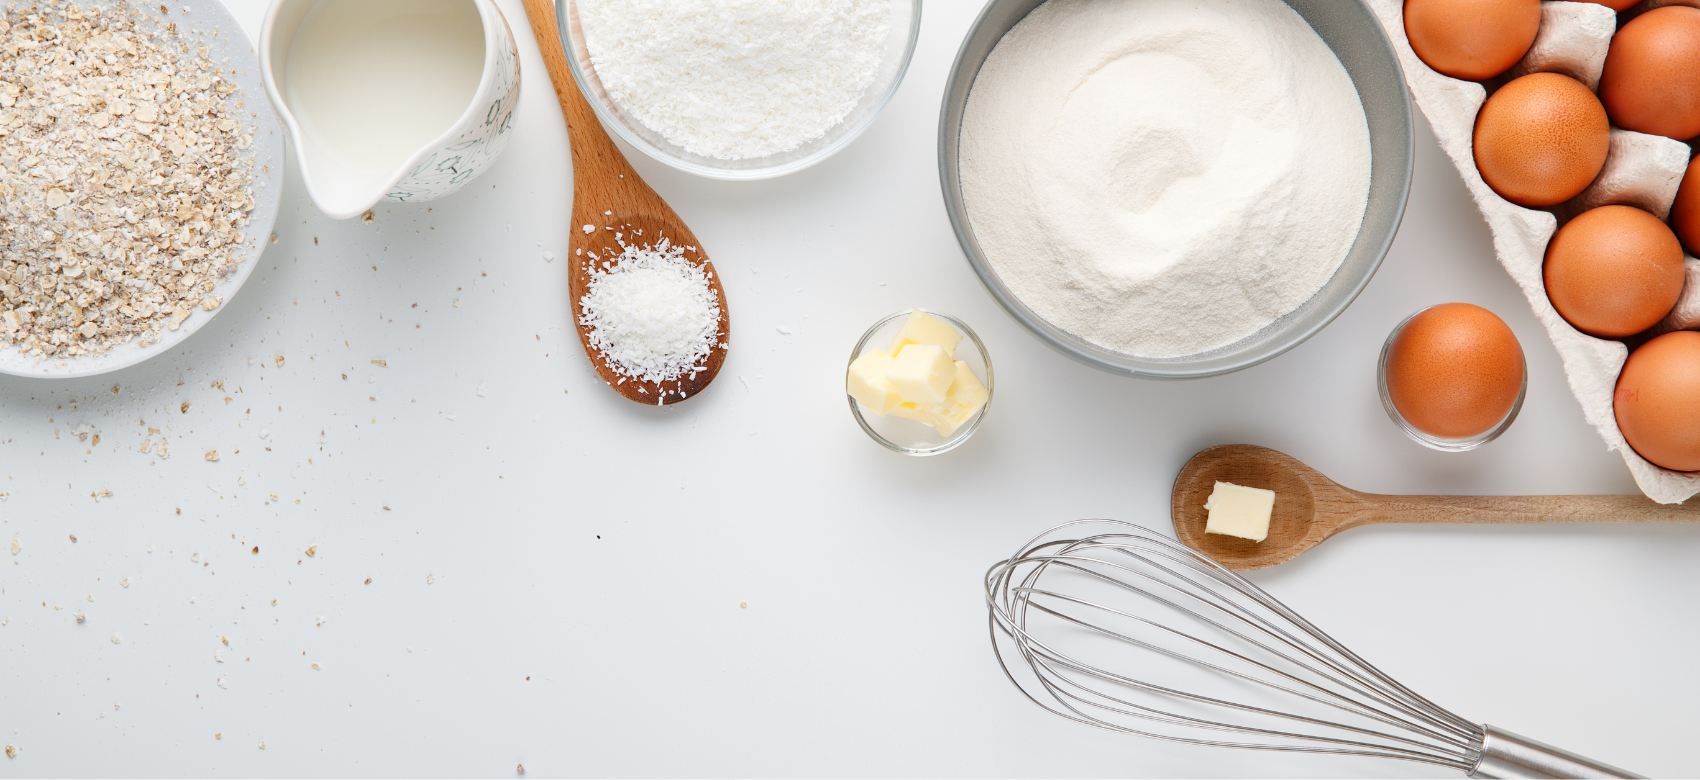 6 Tools to Make Your Baked Goods Better